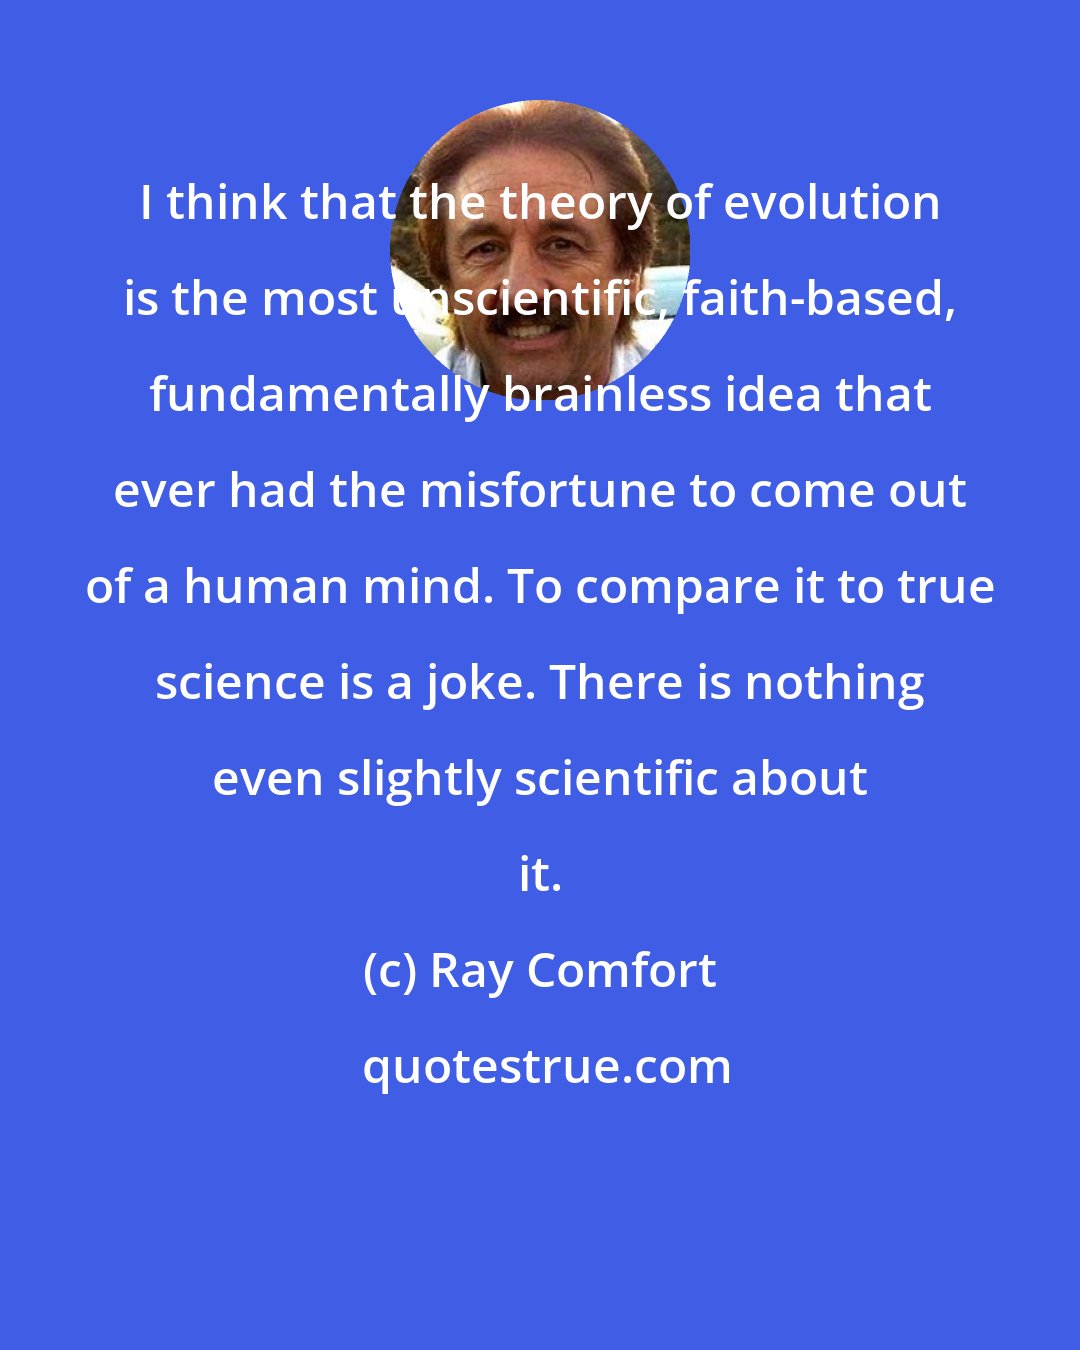 Ray Comfort: I think that the theory of evolution is the most unscientific, faith-based, fundamentally brainless idea that ever had the misfortune to come out of a human mind. To compare it to true science is a joke. There is nothing even slightly scientific about it.